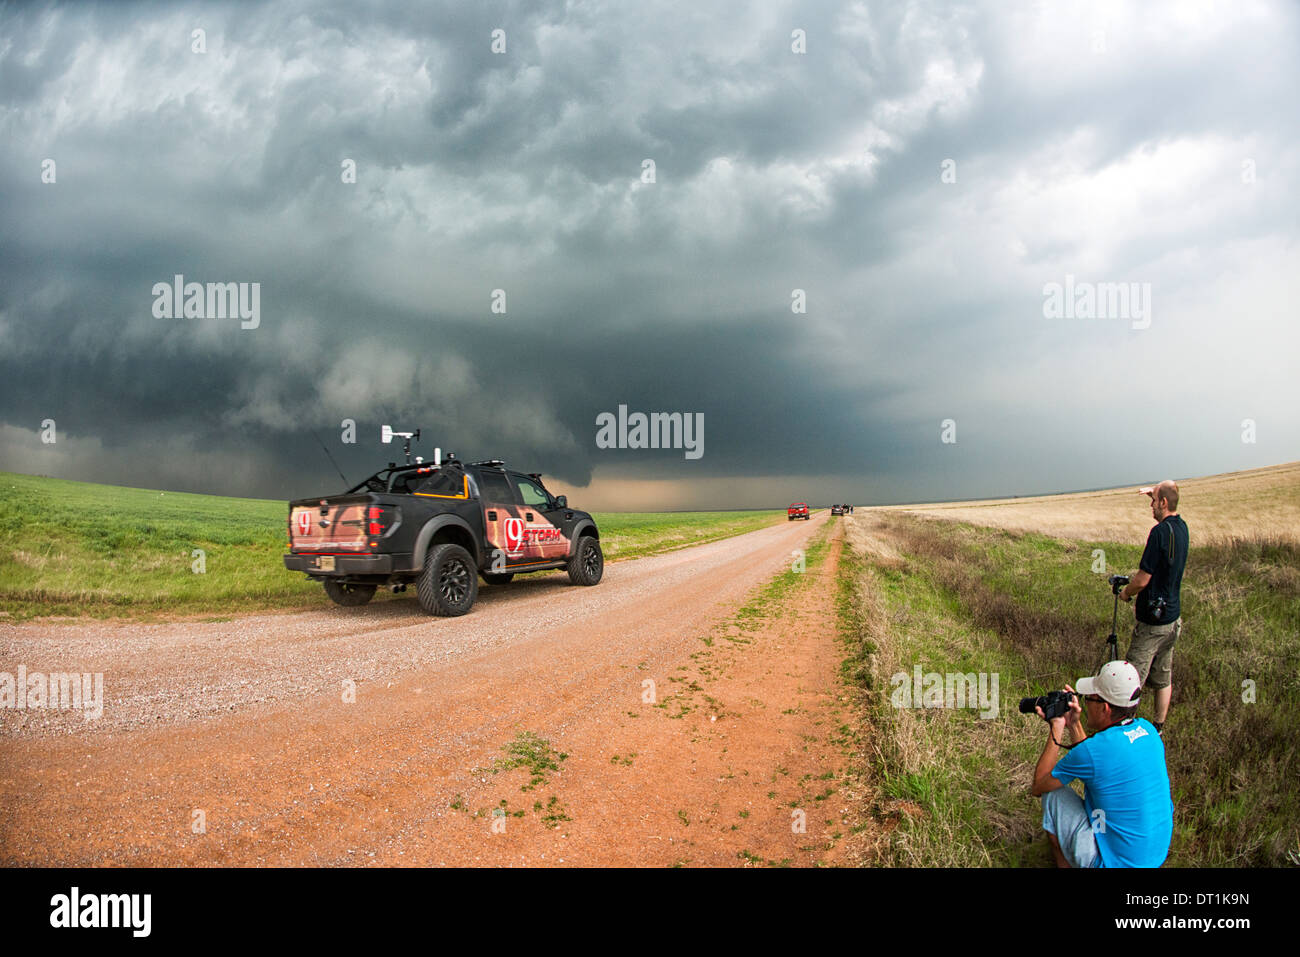 Stormchasers and TV channel nine reporting truck at scene of supercell thunderstorm near Sterling, Oklahoma, USA Stock Photo